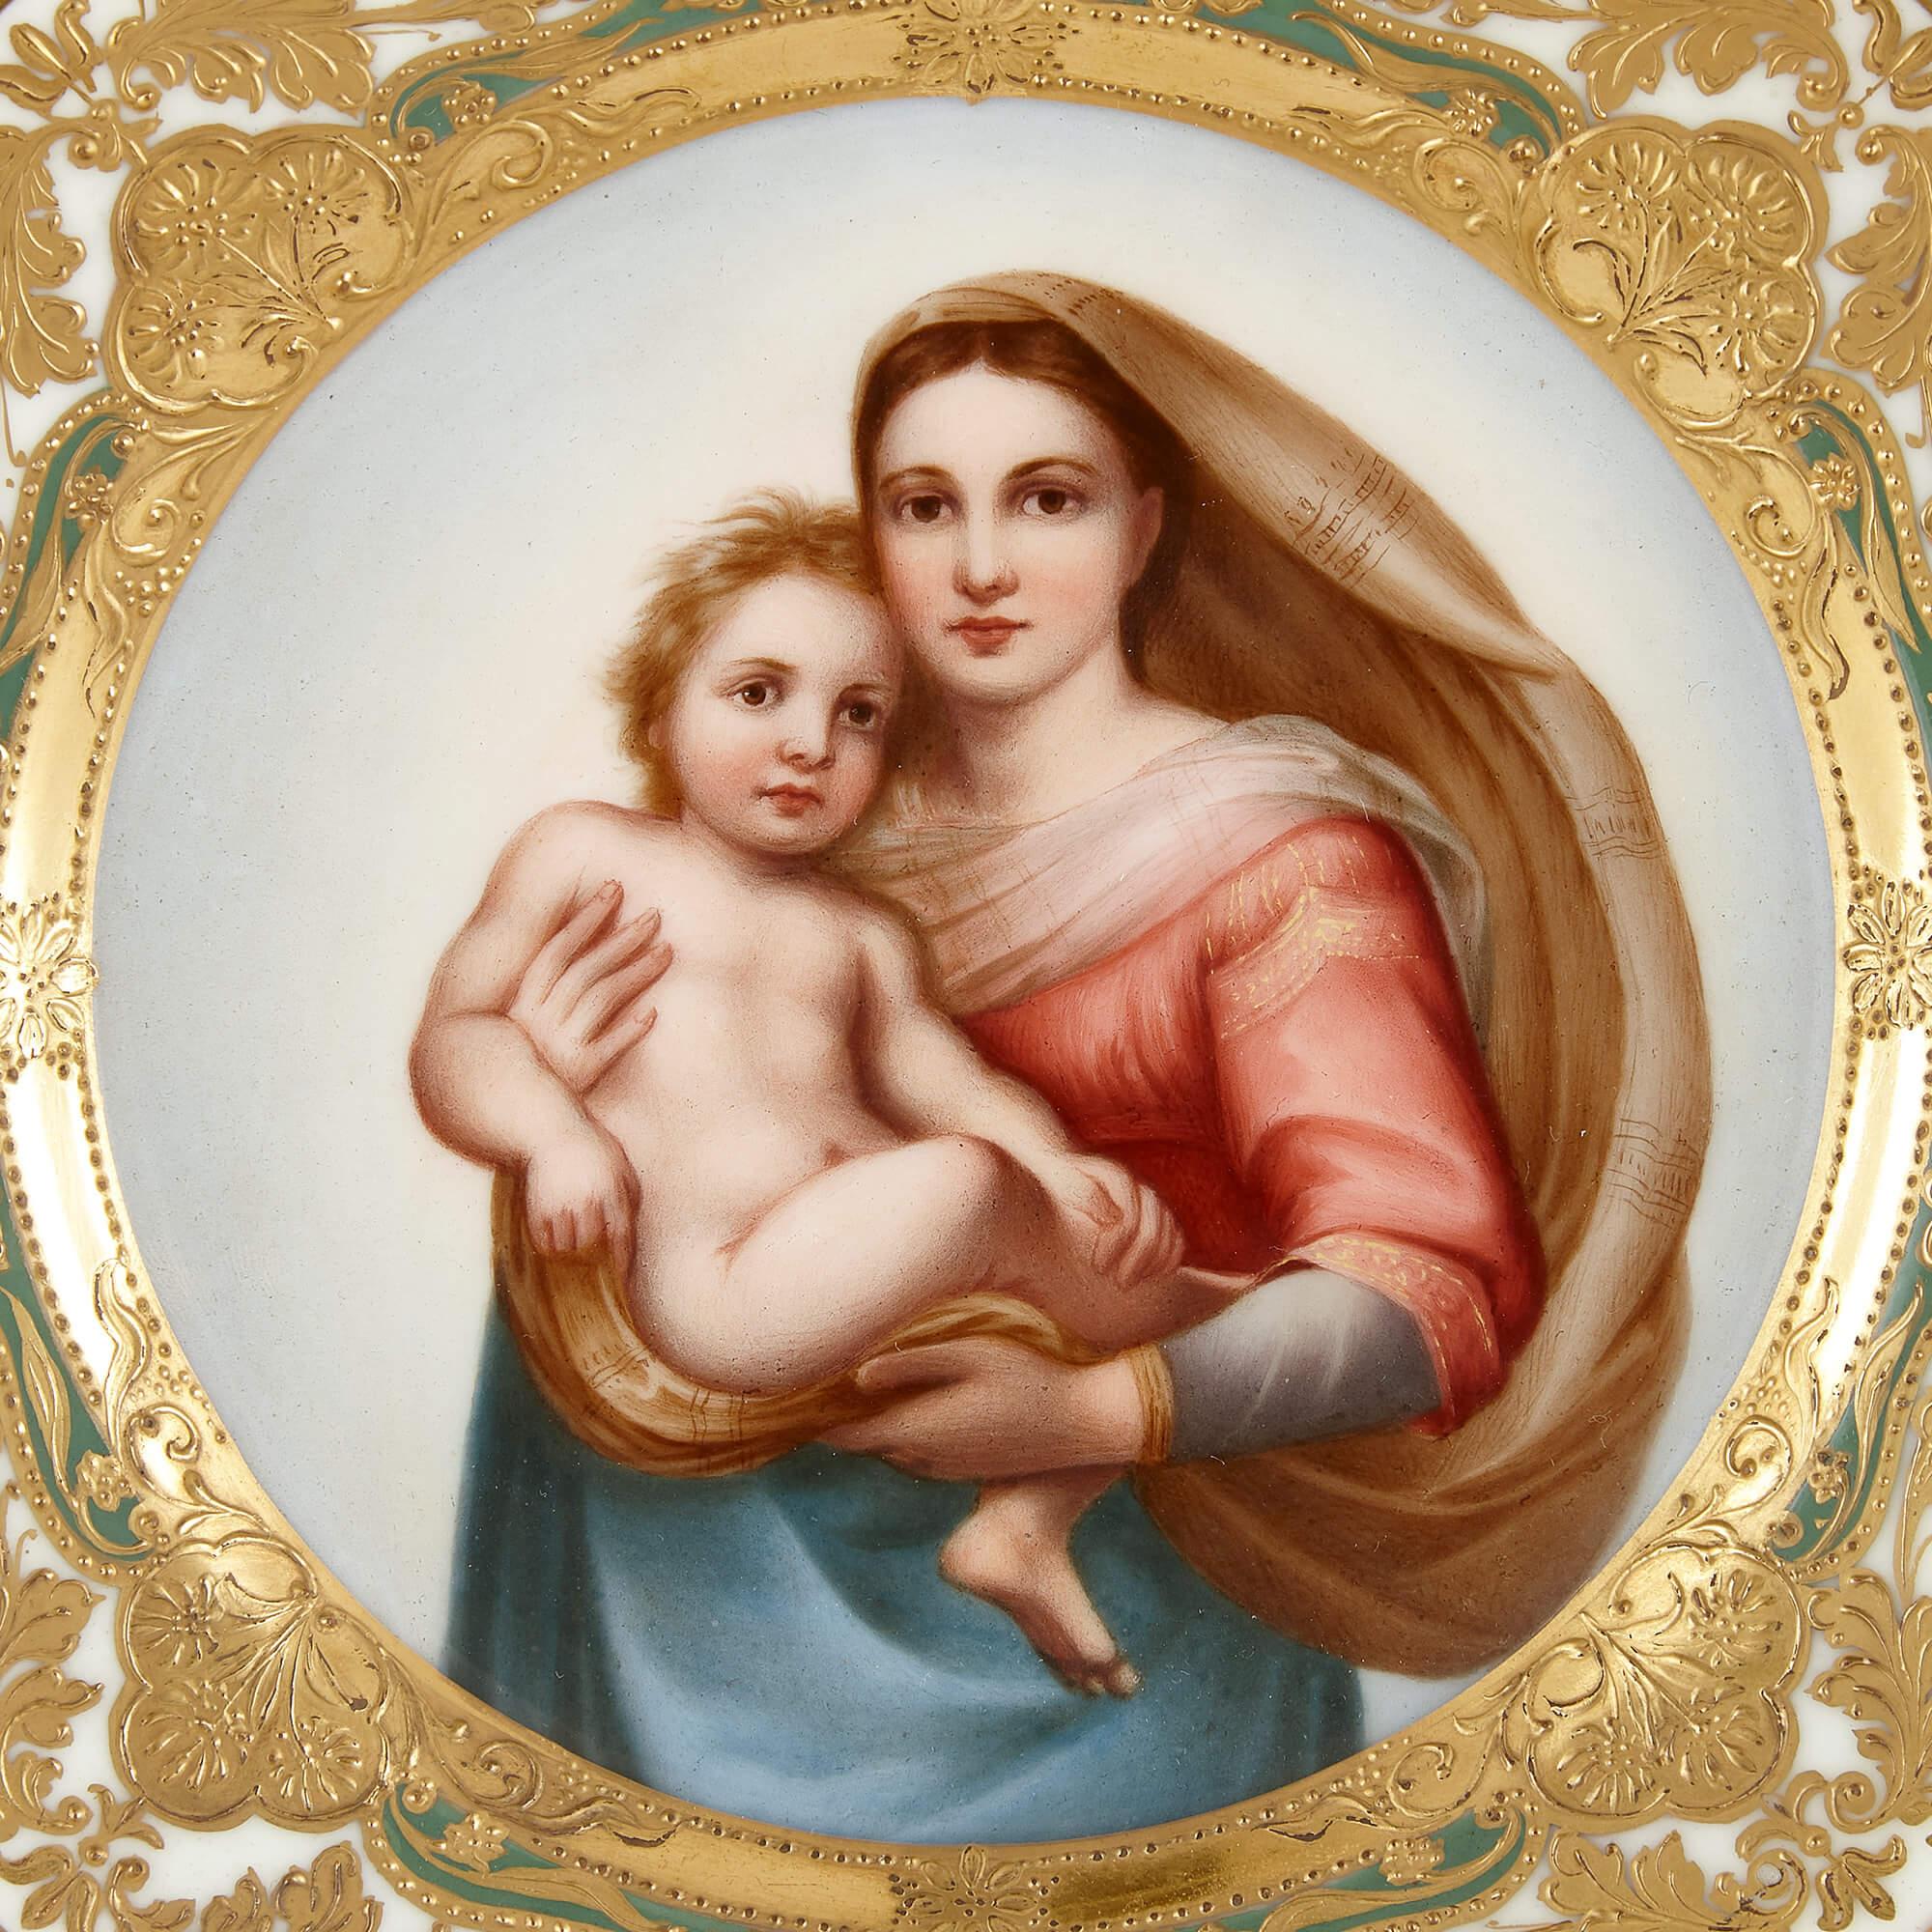 Antique Dresden porcelain cabinet plate depicting the Madonna after Raphael
German, c. 1880
Height 2.5cm, diameter 19.5cm

This finely painted Dresden porcelain cabinet plate is decorated to the centre with a copy of Raphael's Sistine Madonna, 1513.